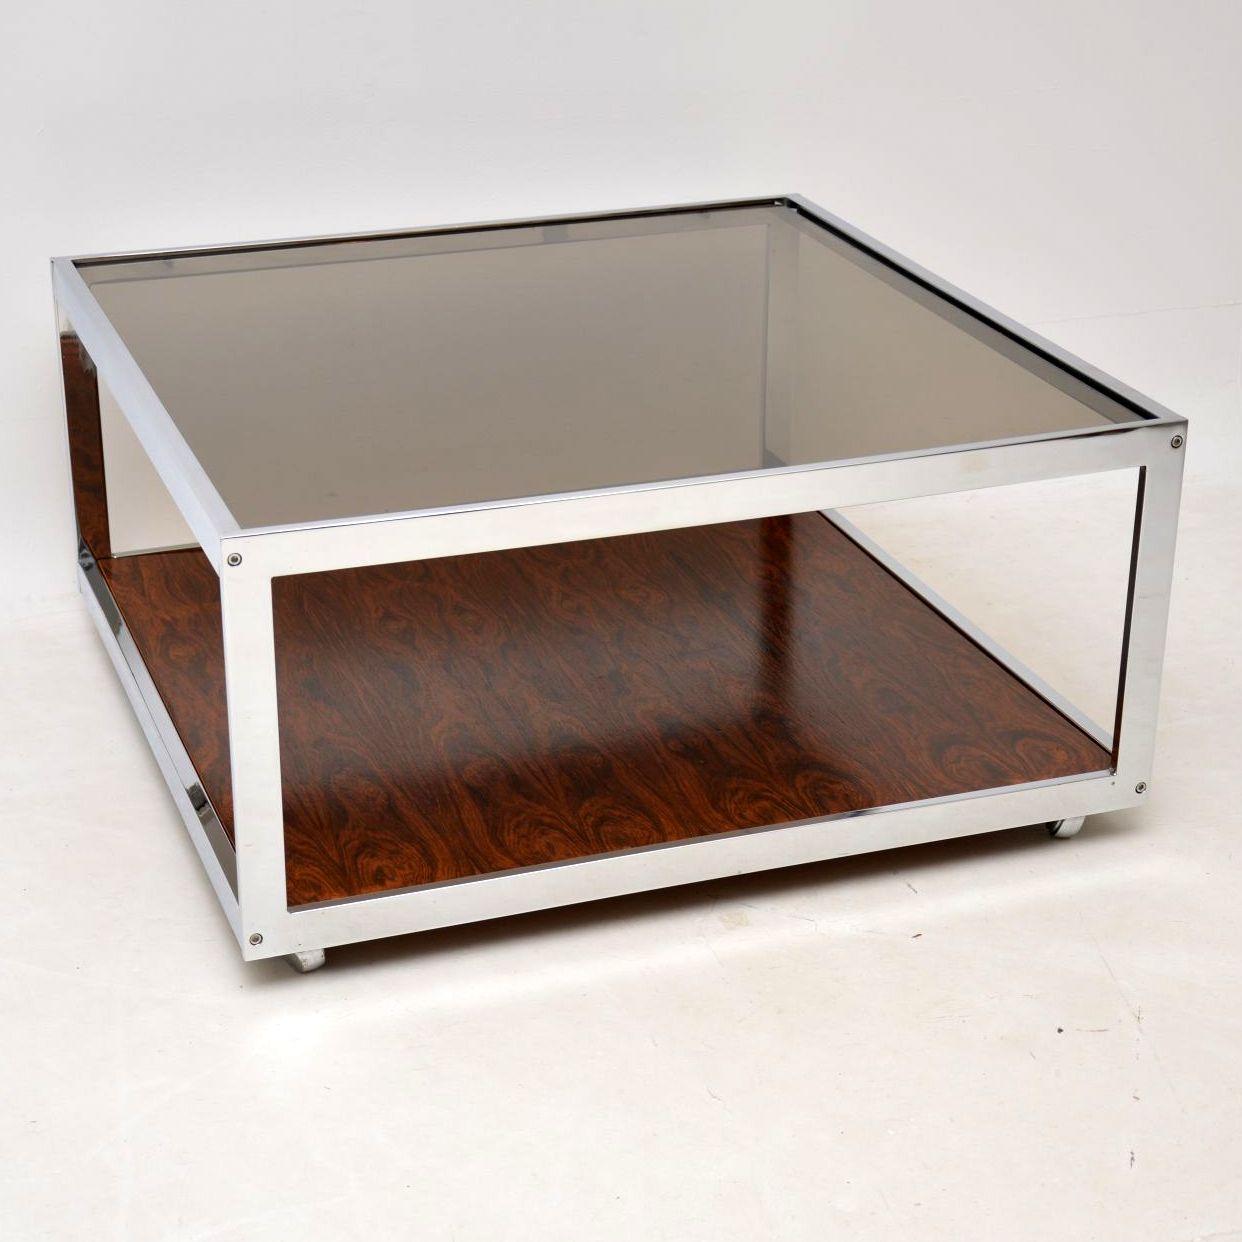 A stunning vintage coffee table made by MDA Howard Miller Associates, this dates from the 1970s. It has a lovely chrome frame, thick glass top and stunning wood base. The condition is excellent for its age, it is all very clean and structurally